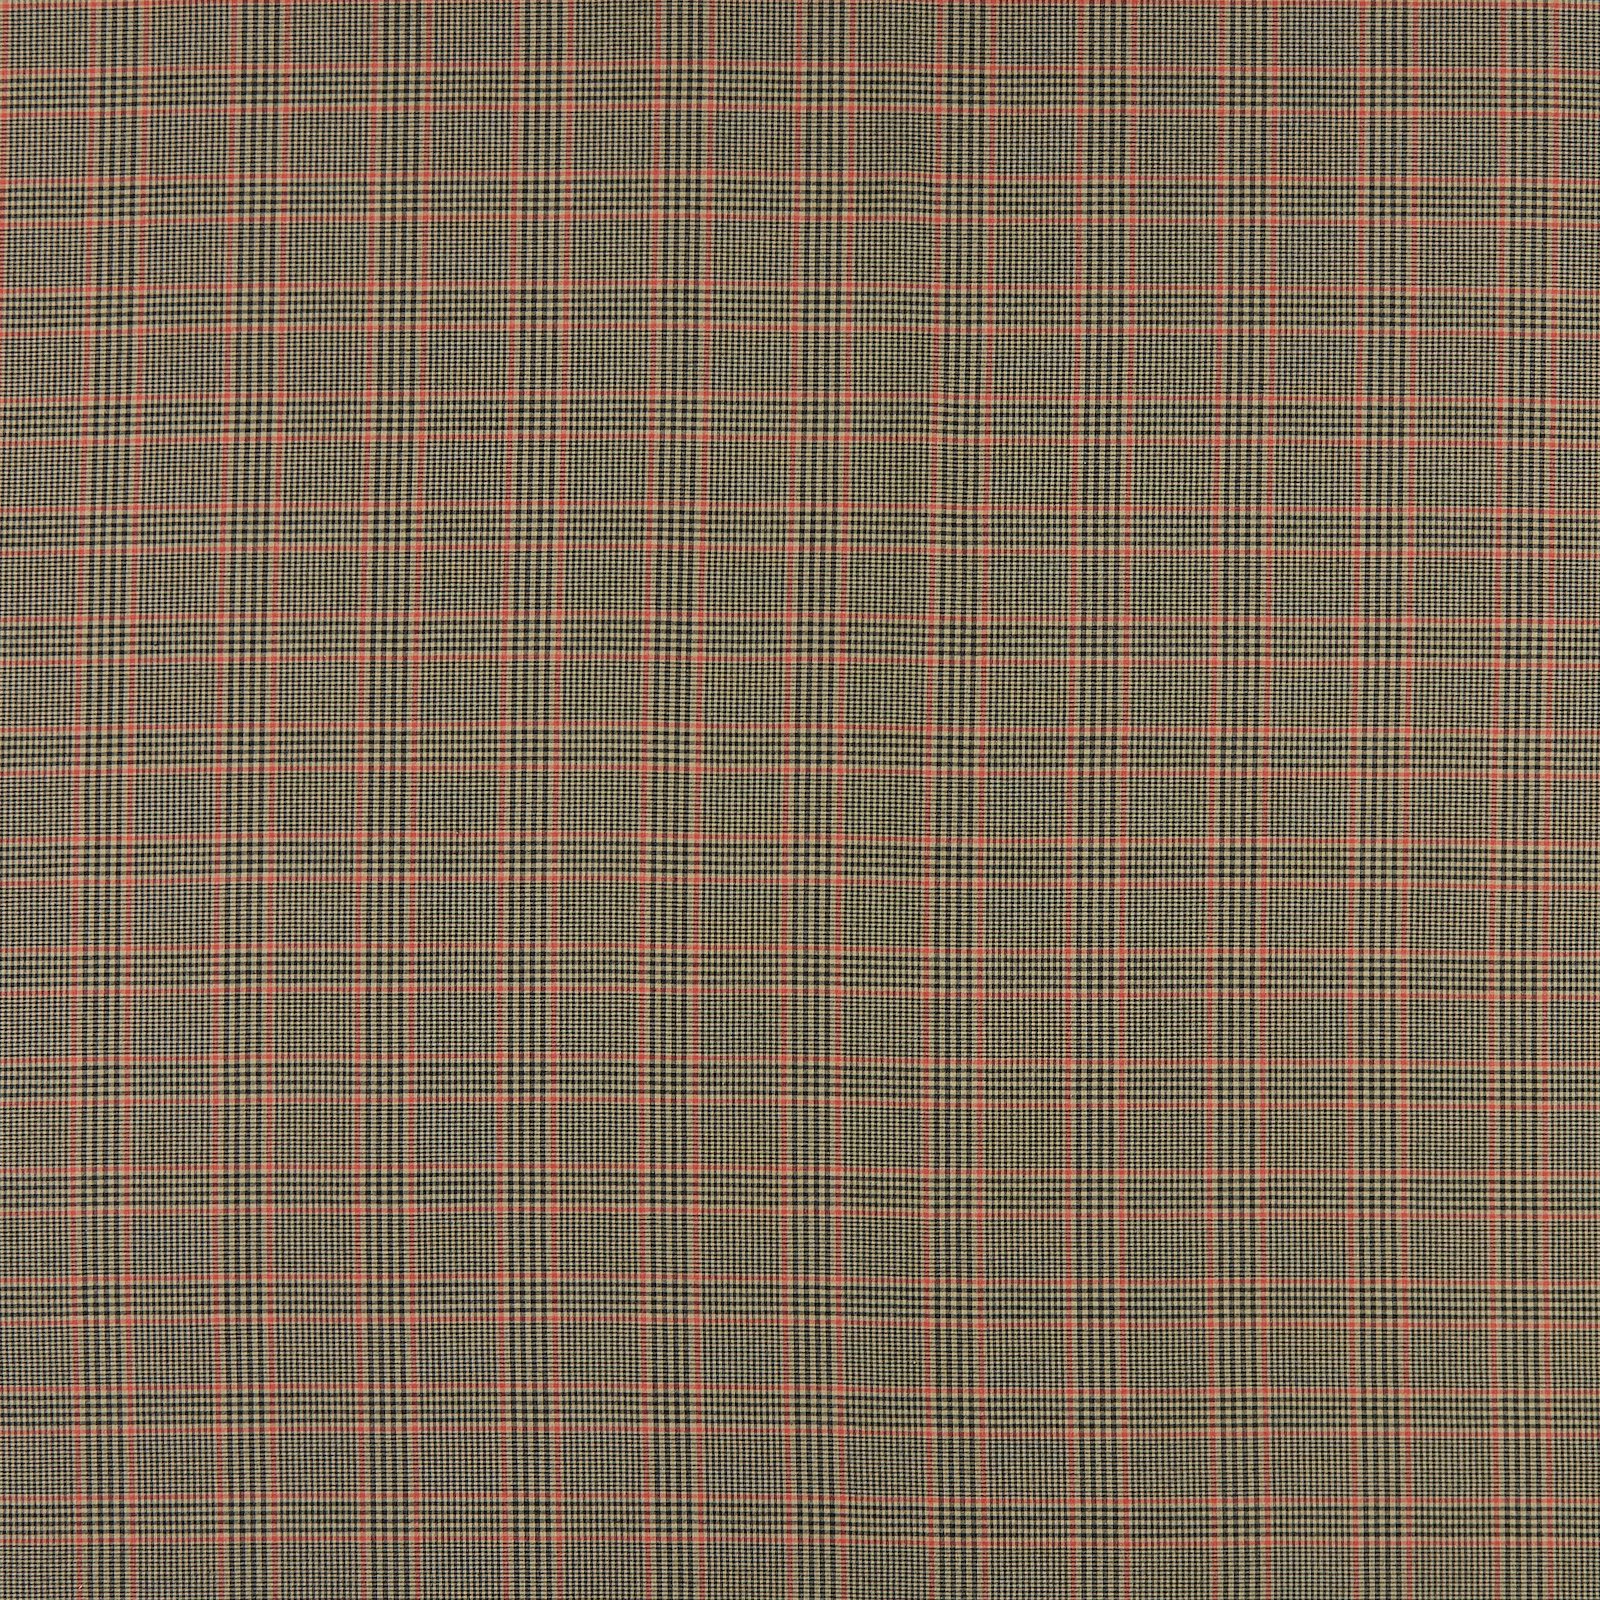 Woven viscose YD check 701925_pack_sp